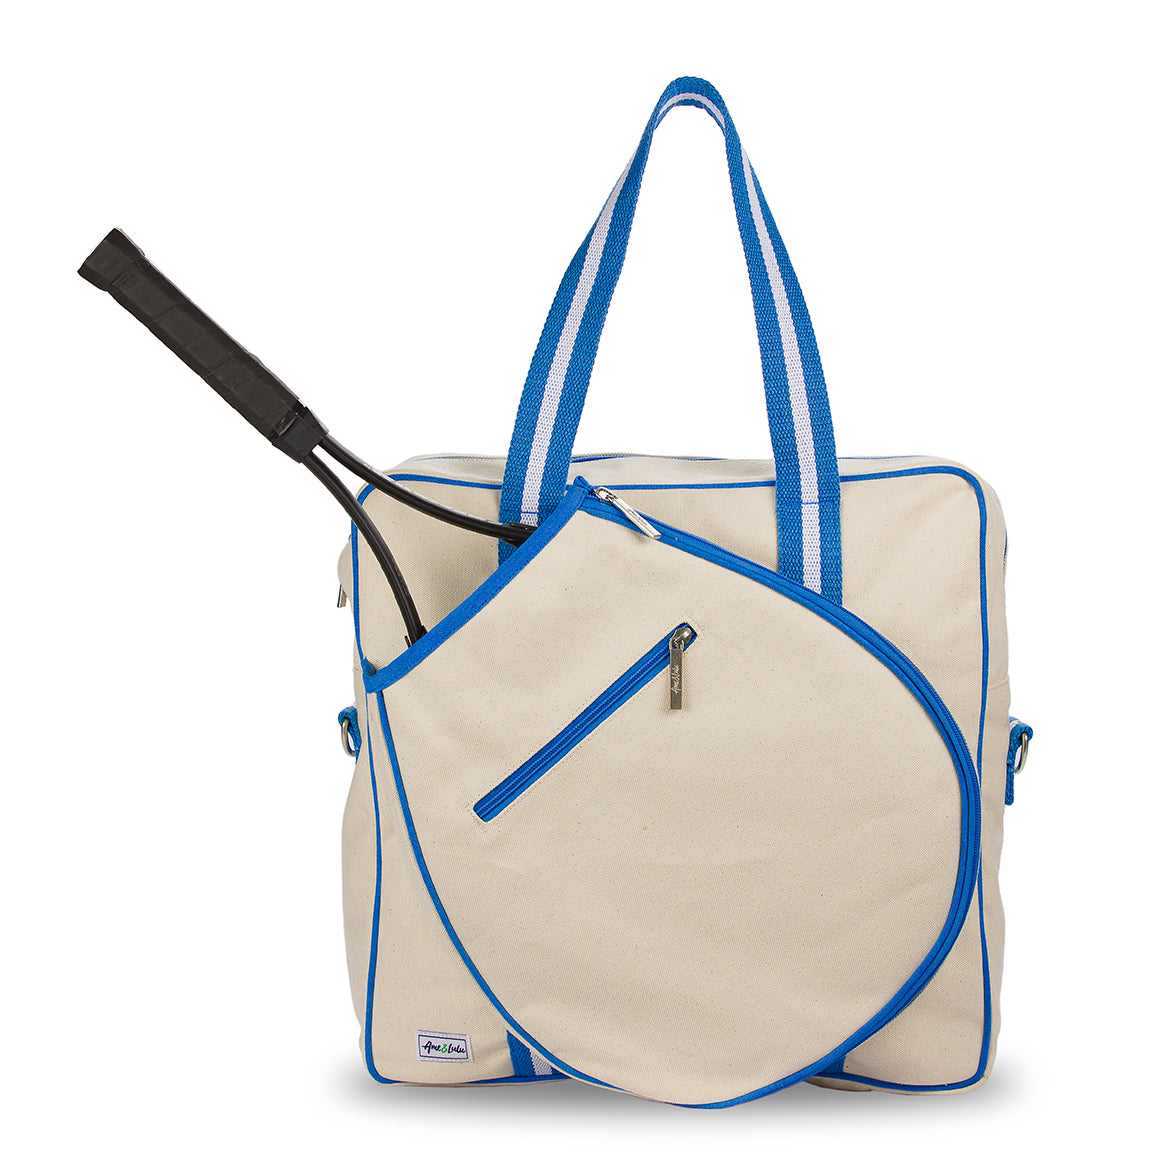 Front view of large canvas tennis tote with bright blue trim and handles. Bag has front pocket for tennis racquet